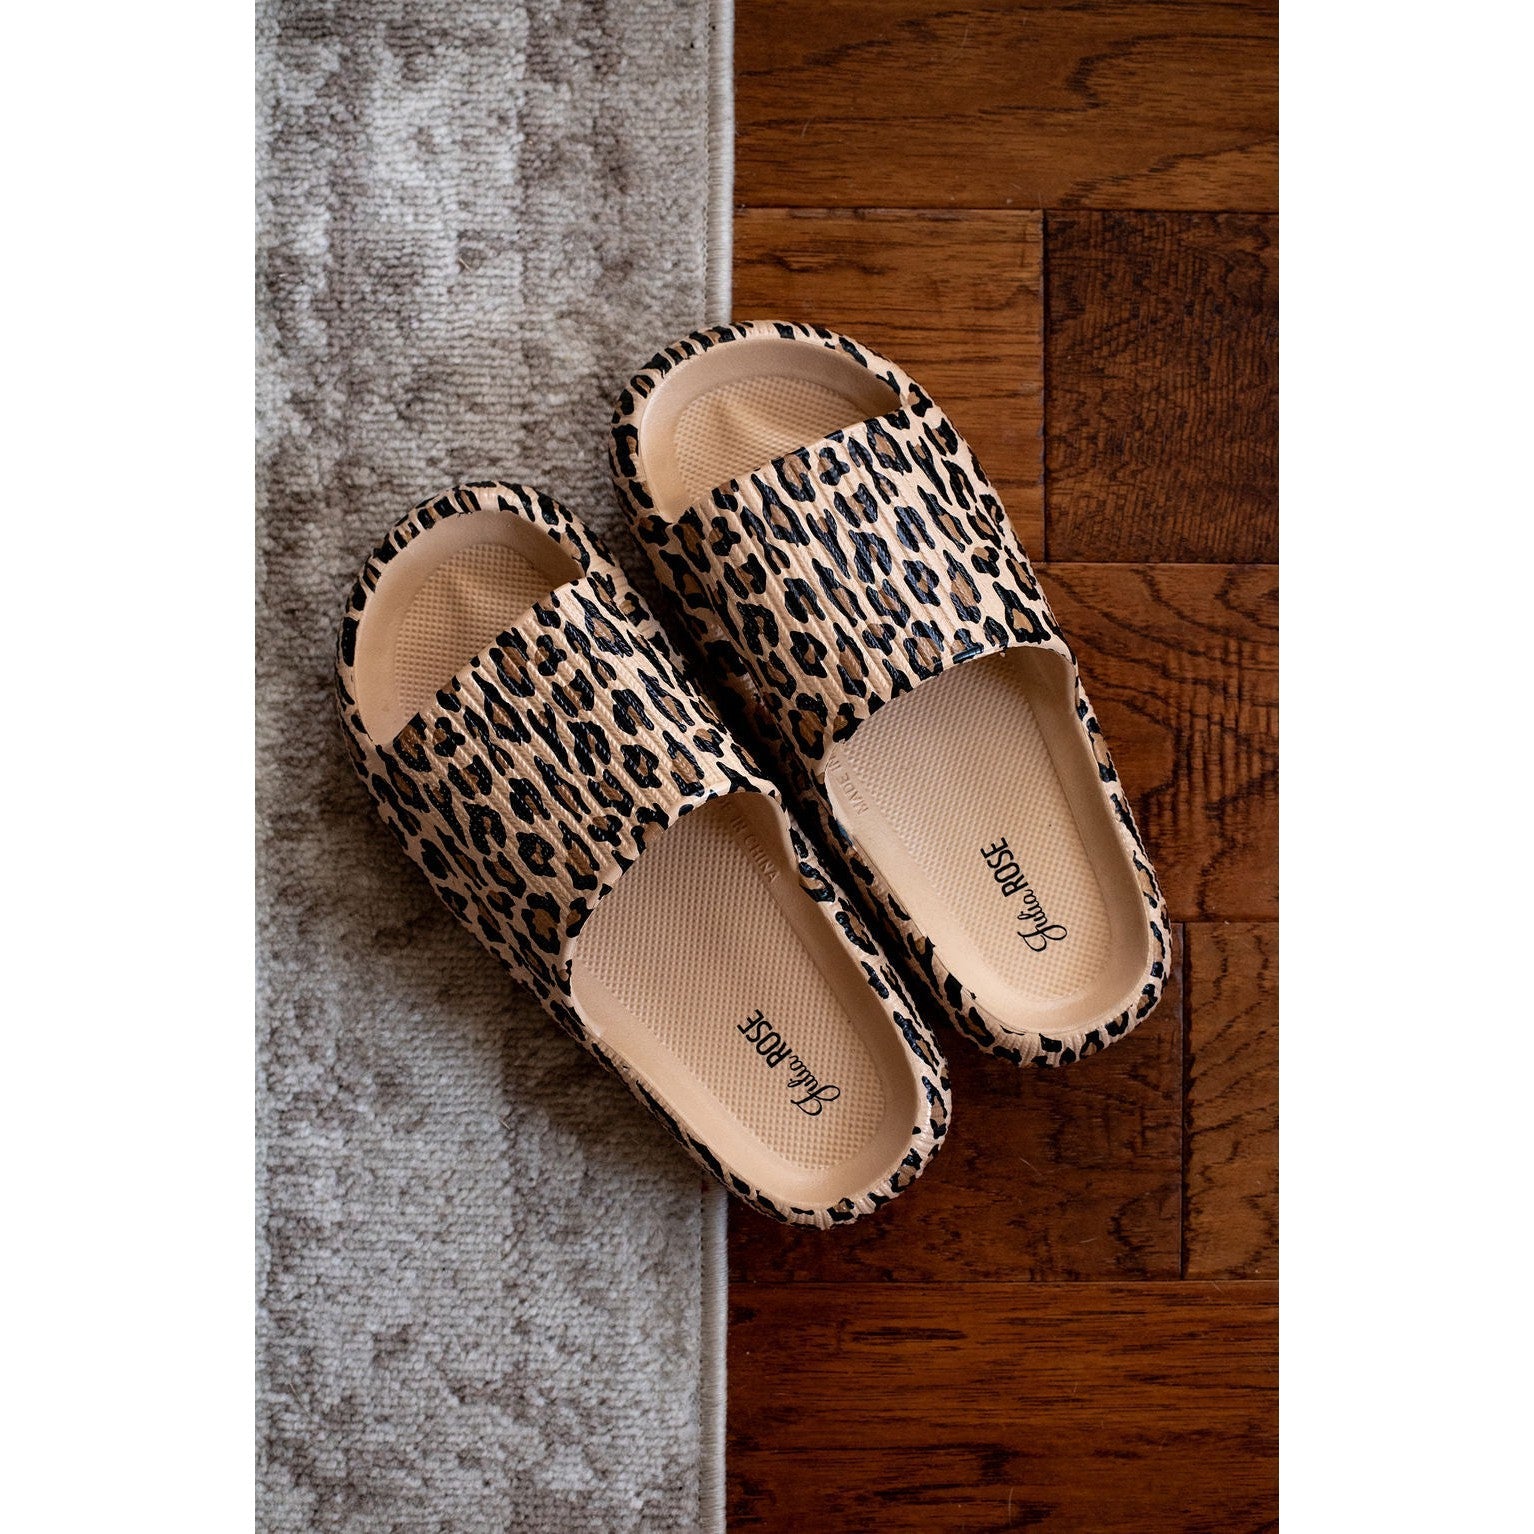 Brown Leopard  Insanely Comfy - Beach or Casual Slides